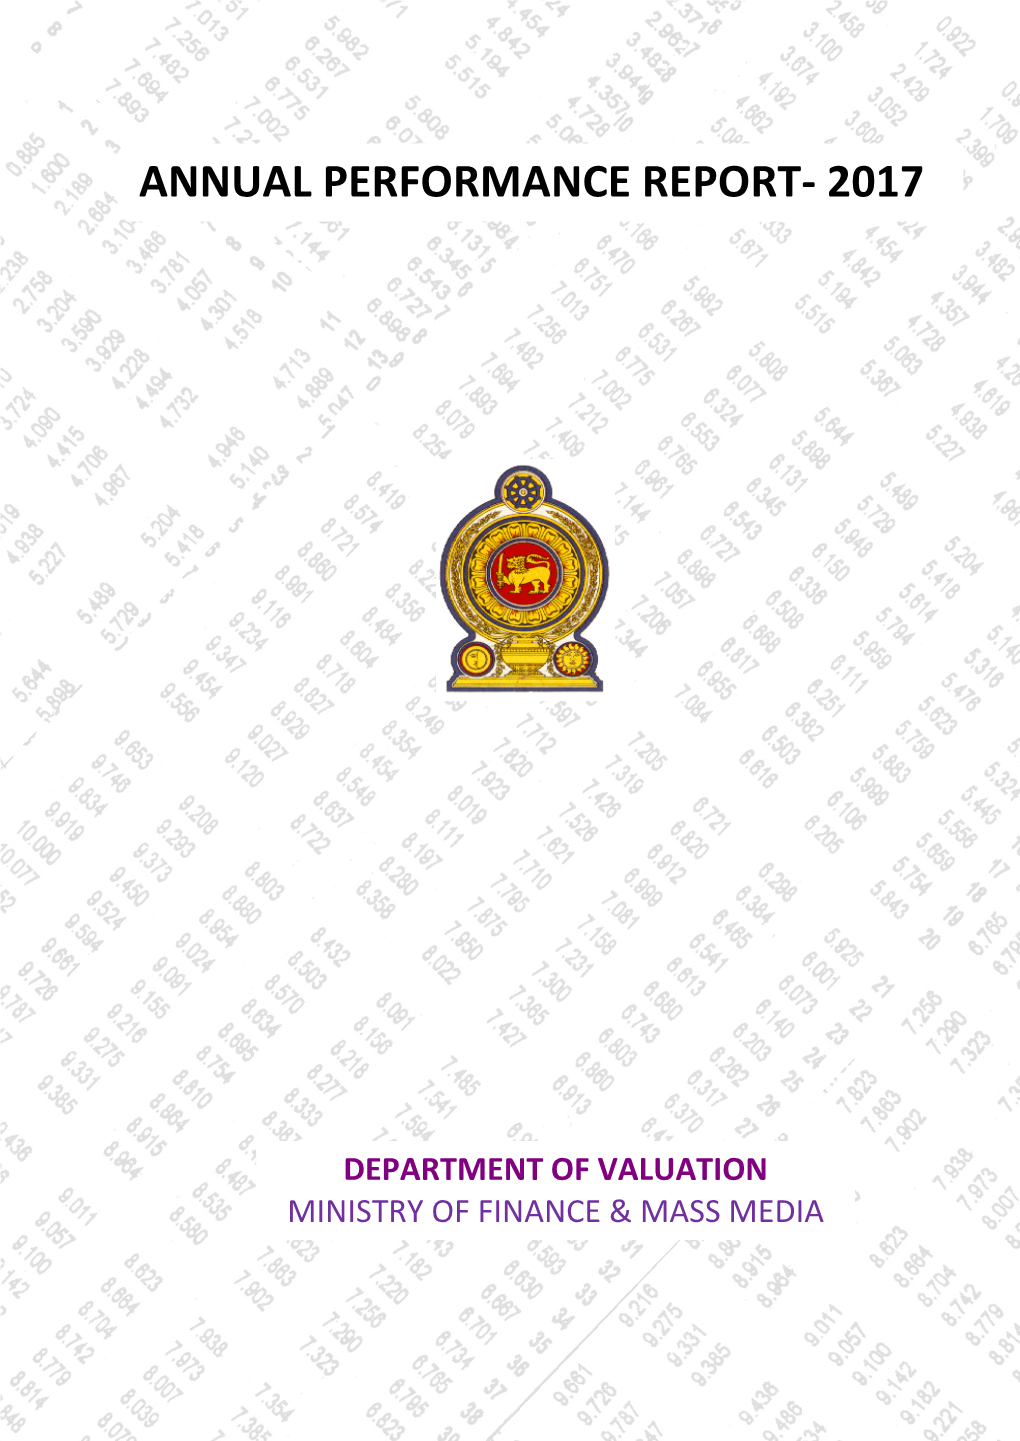 Annual Performance Report of the Department of Valuation for The